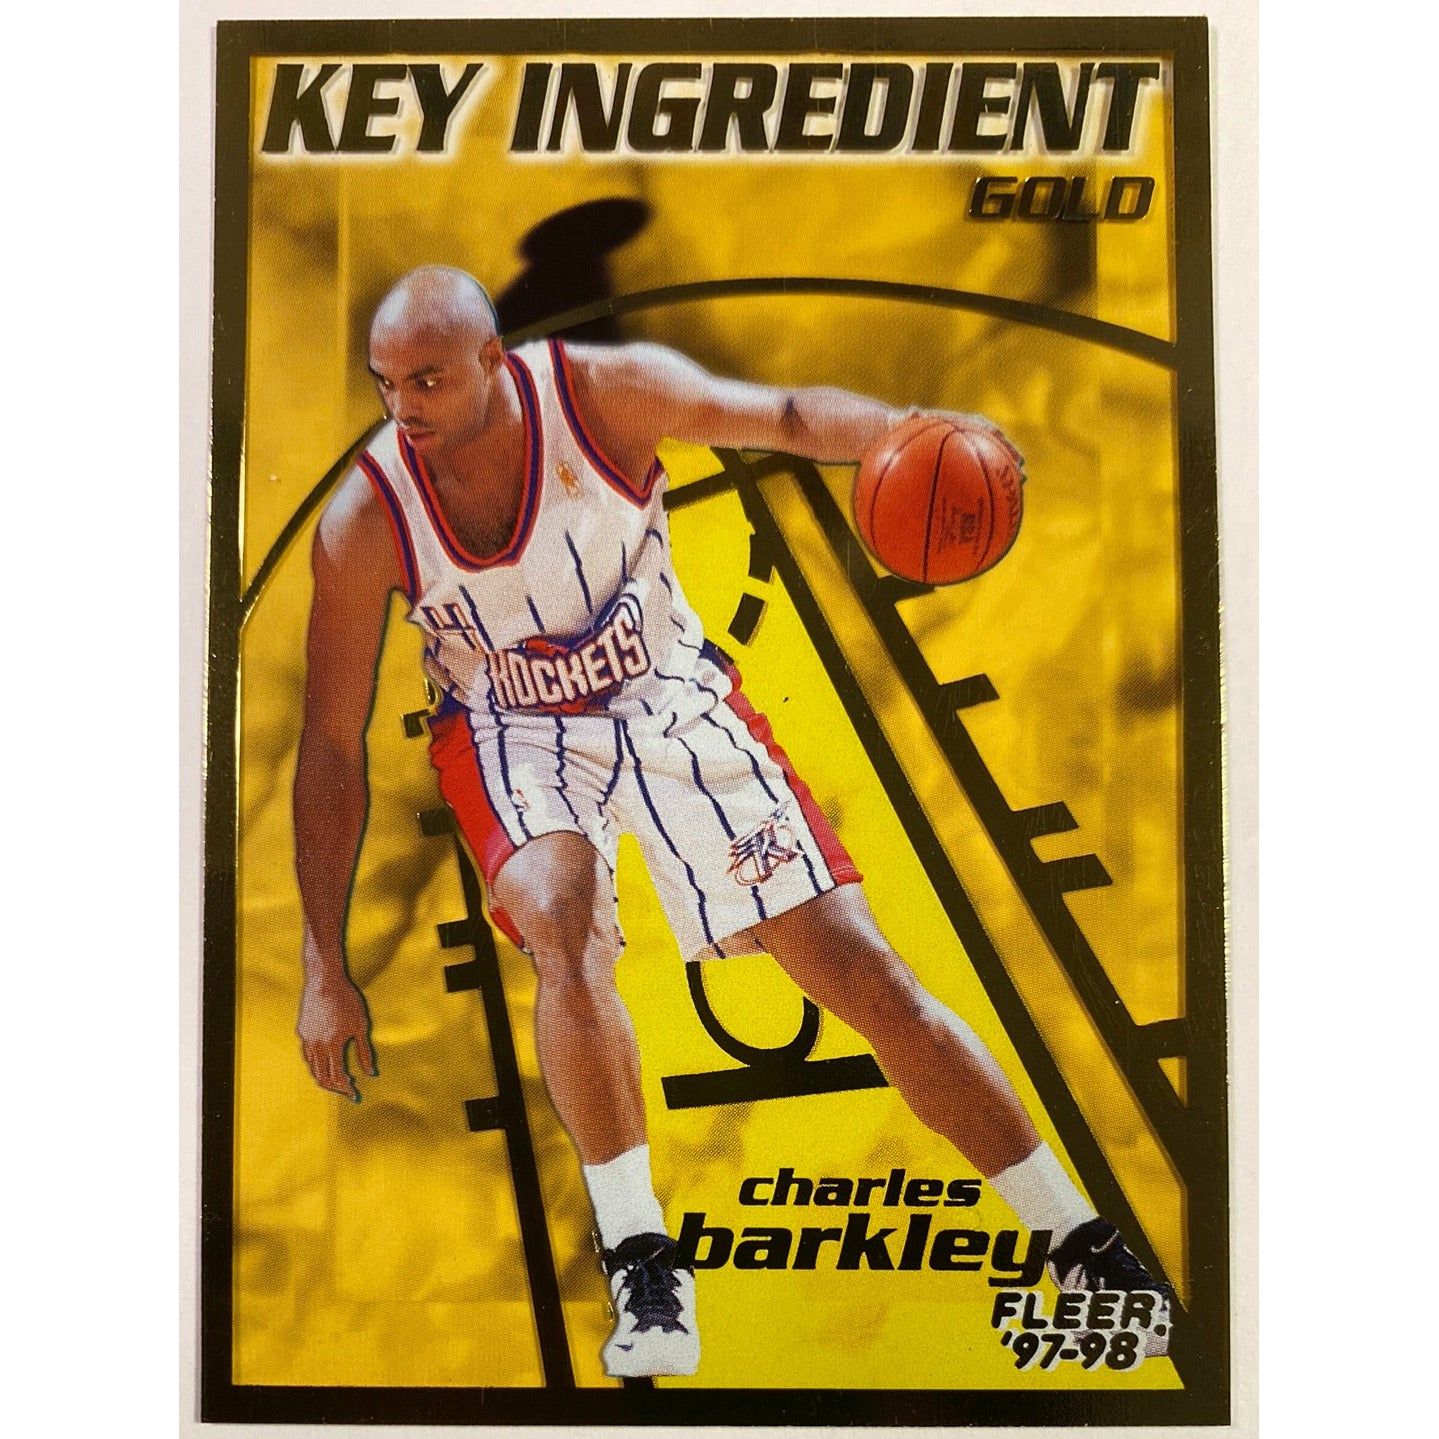  1997-98 Fleer Gold Charles Barkley Key Ingredient Clear Cut  Local Legends Cards & Collectibles